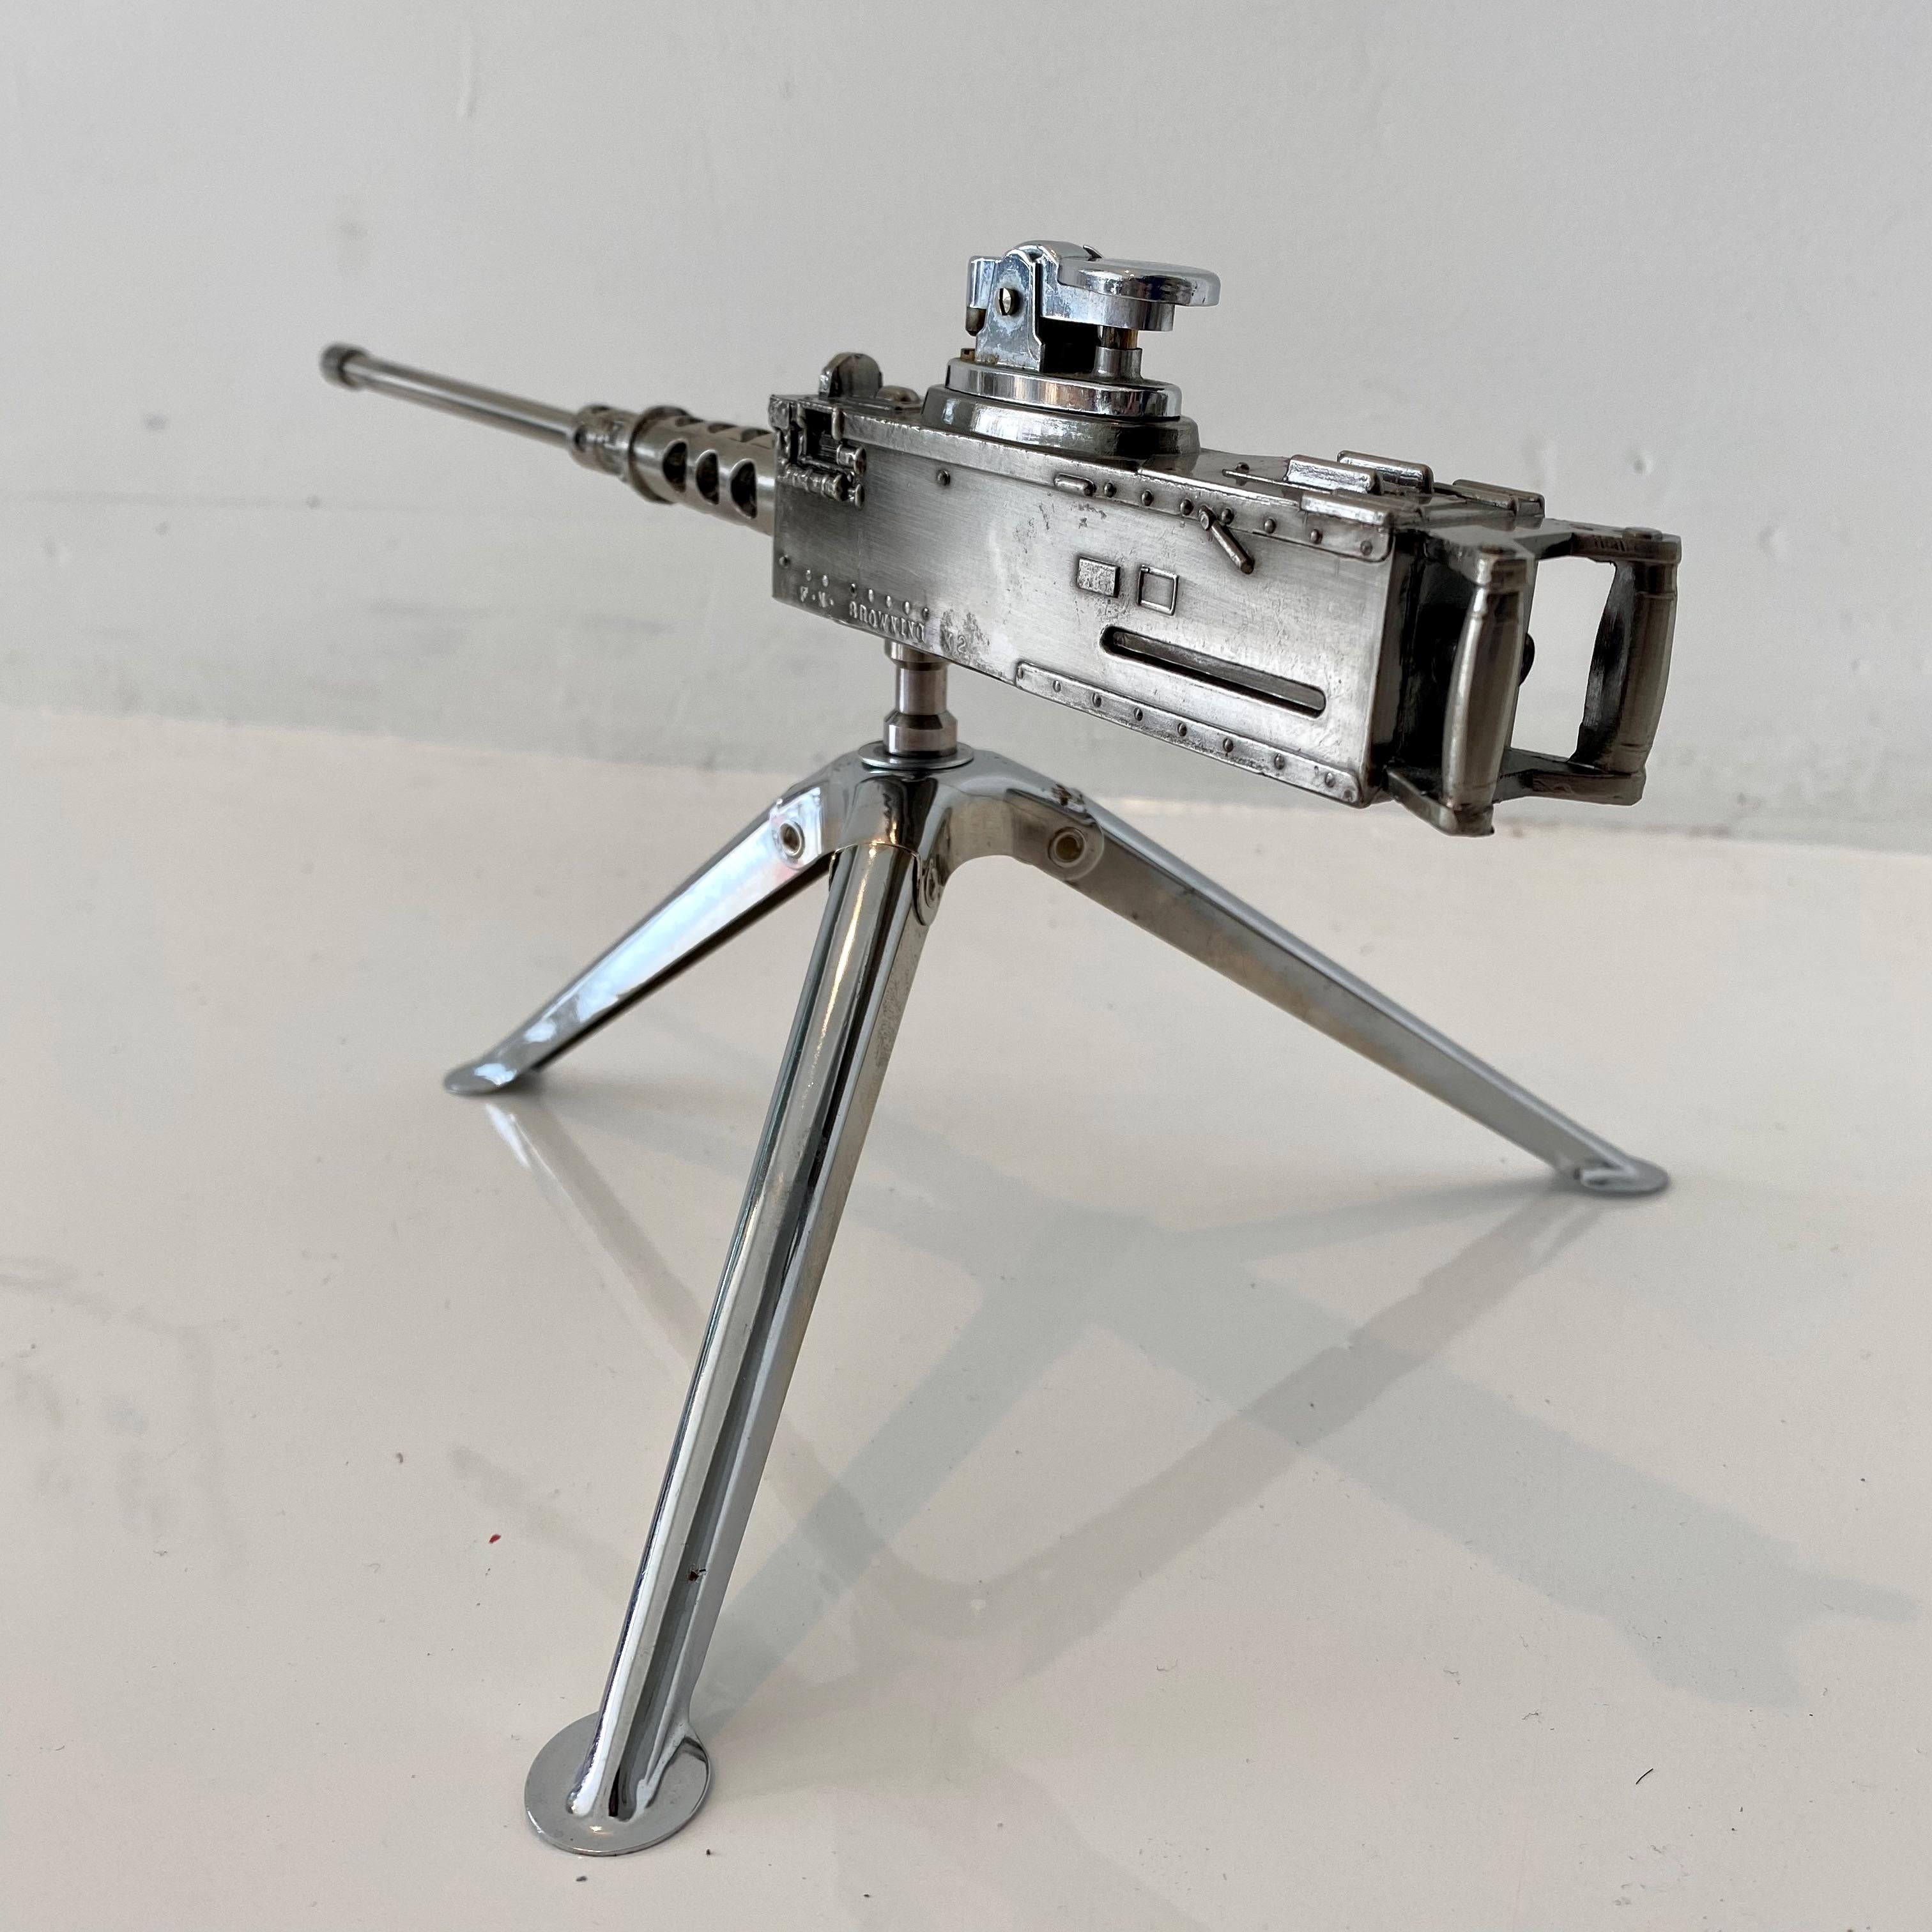 Cool vintage table lighter in the shape of a Browning M2 machine gun. Made of metal and rotates 360 degrees. Tripod arms fold up and down. Made in Japan. Cool tobacco accessory and conversation piece. Working lighter. Great vintage condition.